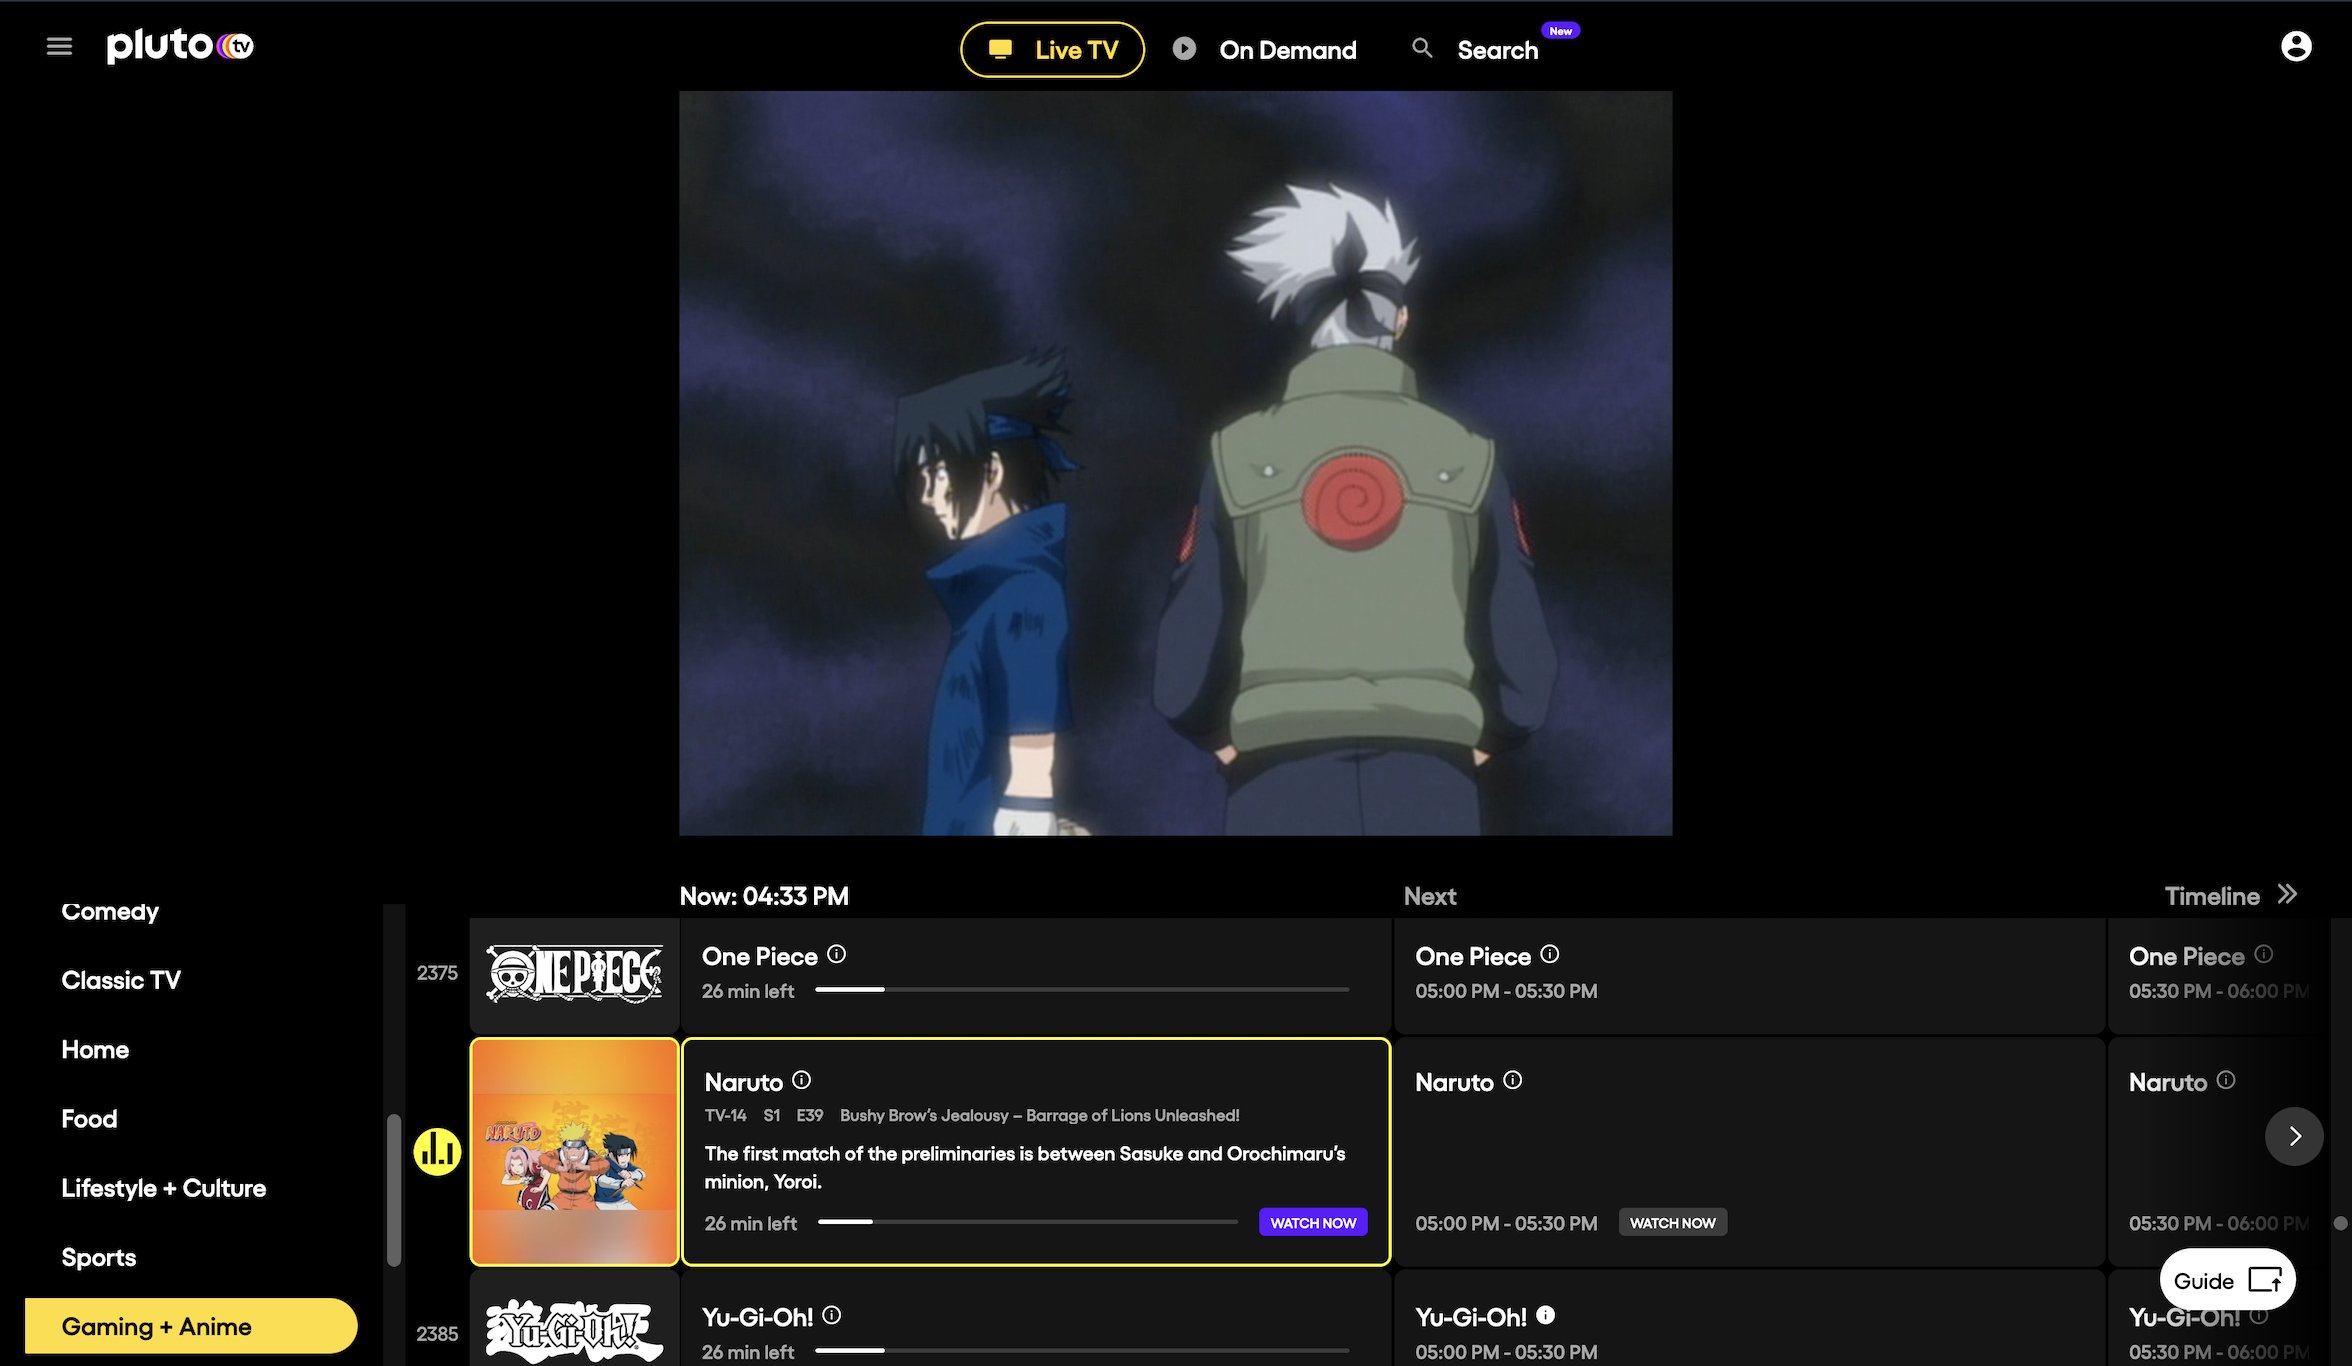 Stream anime on Pluto TV and watch anime shows such as Naruto, One Piece, joJo bizarre adventure and many more